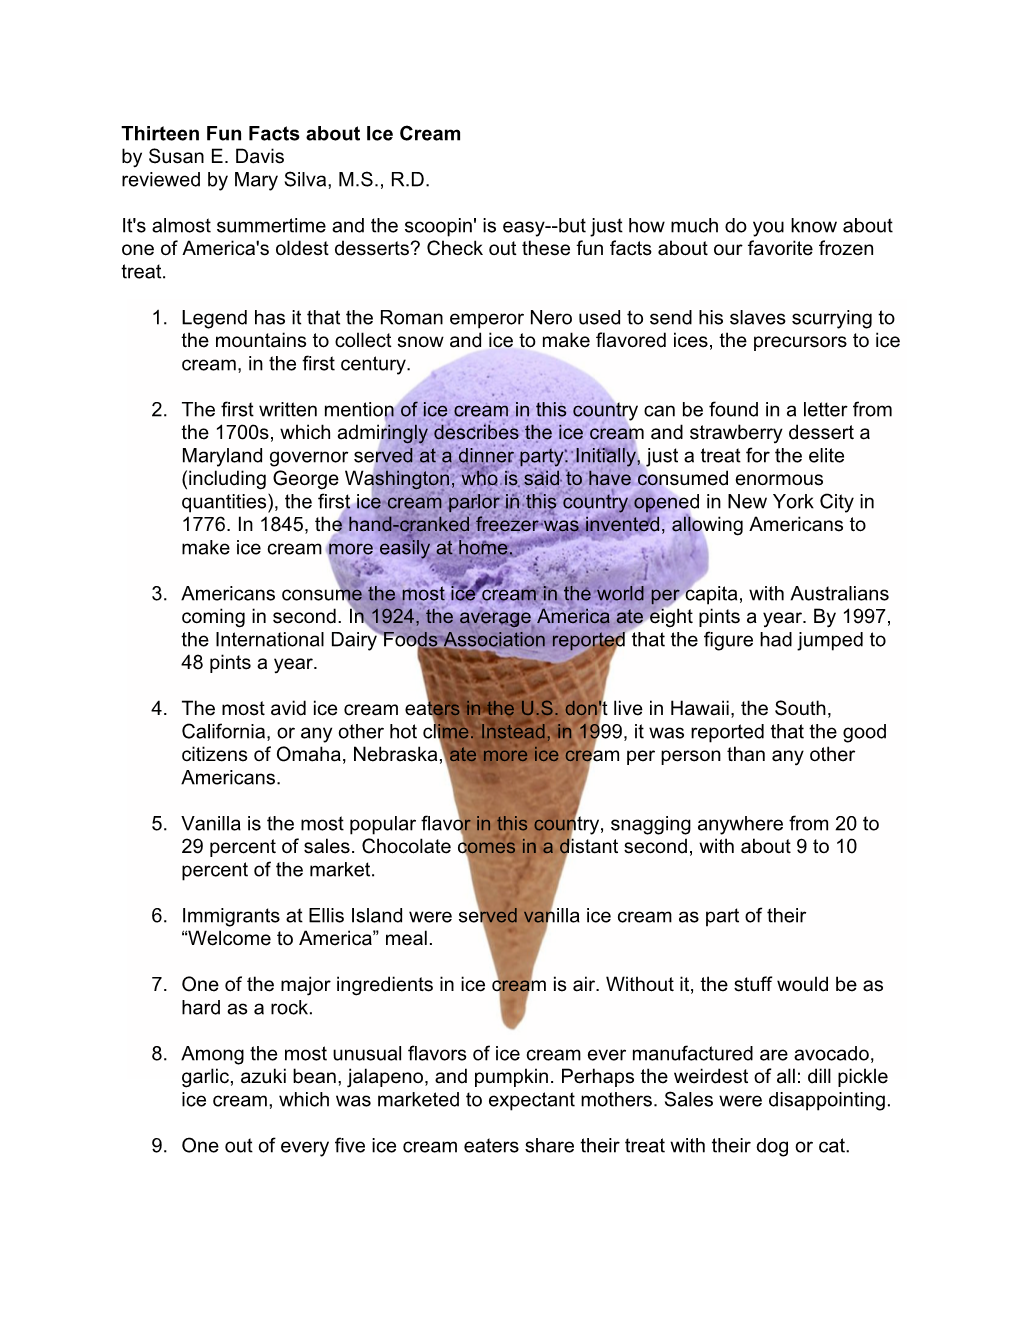 Thirteen Fun Facts About Ice Cream by Susan E. Davis Reviewed by Mary Silva, M.S., R.D. It's Almost Summertime and the Scoopin'